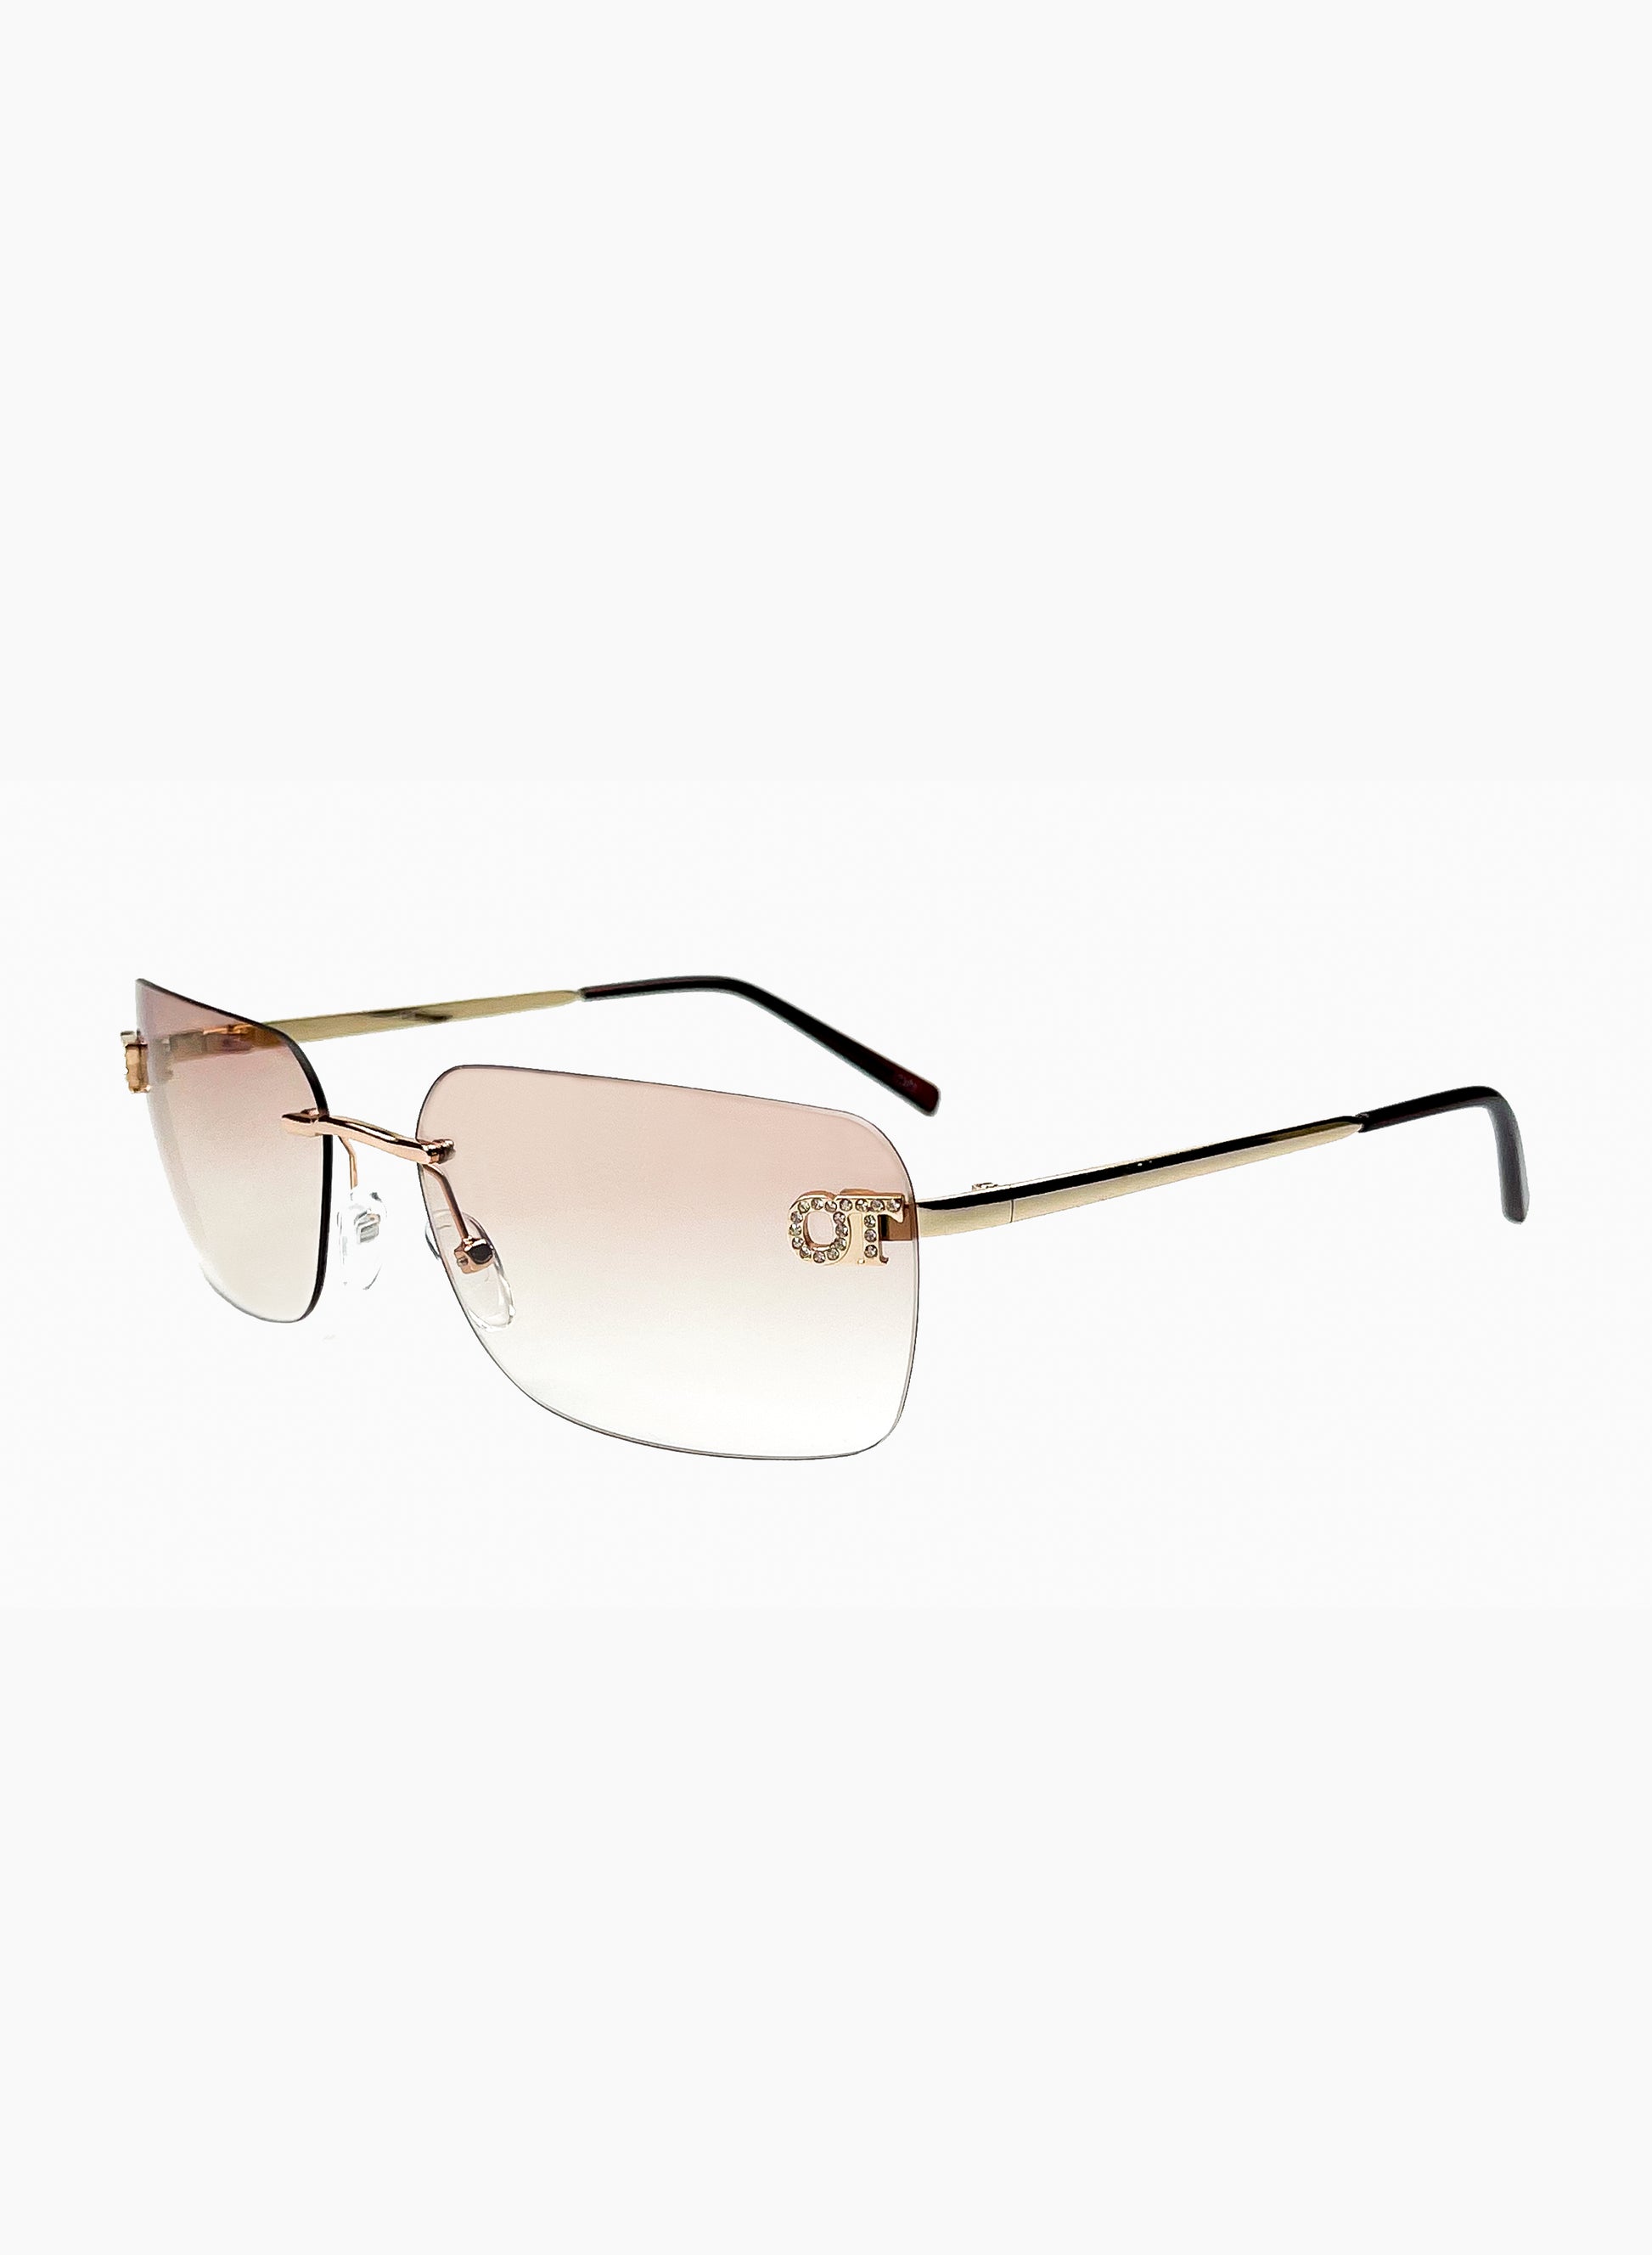 Cara sunglasses in gold frame with brown lenses